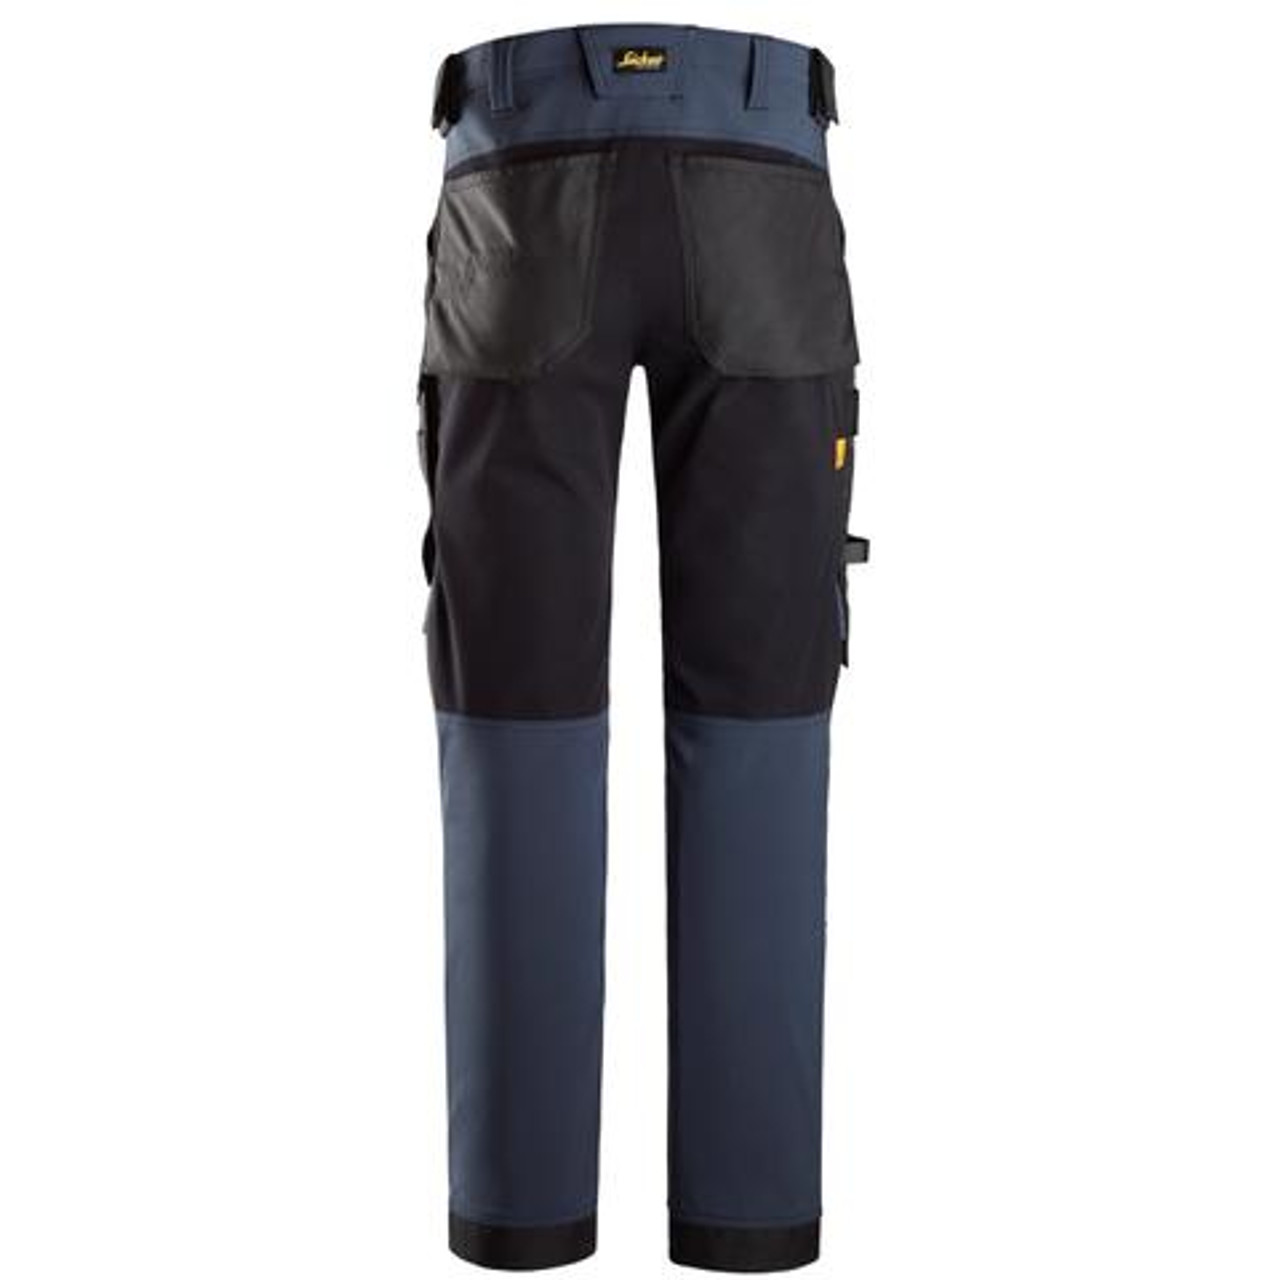 Buy online in Australia, New Zealand and Canada SNICKERS 4-Way Stretch Navy Blue Trousers for Floorlayers that have Kneepad Pockets